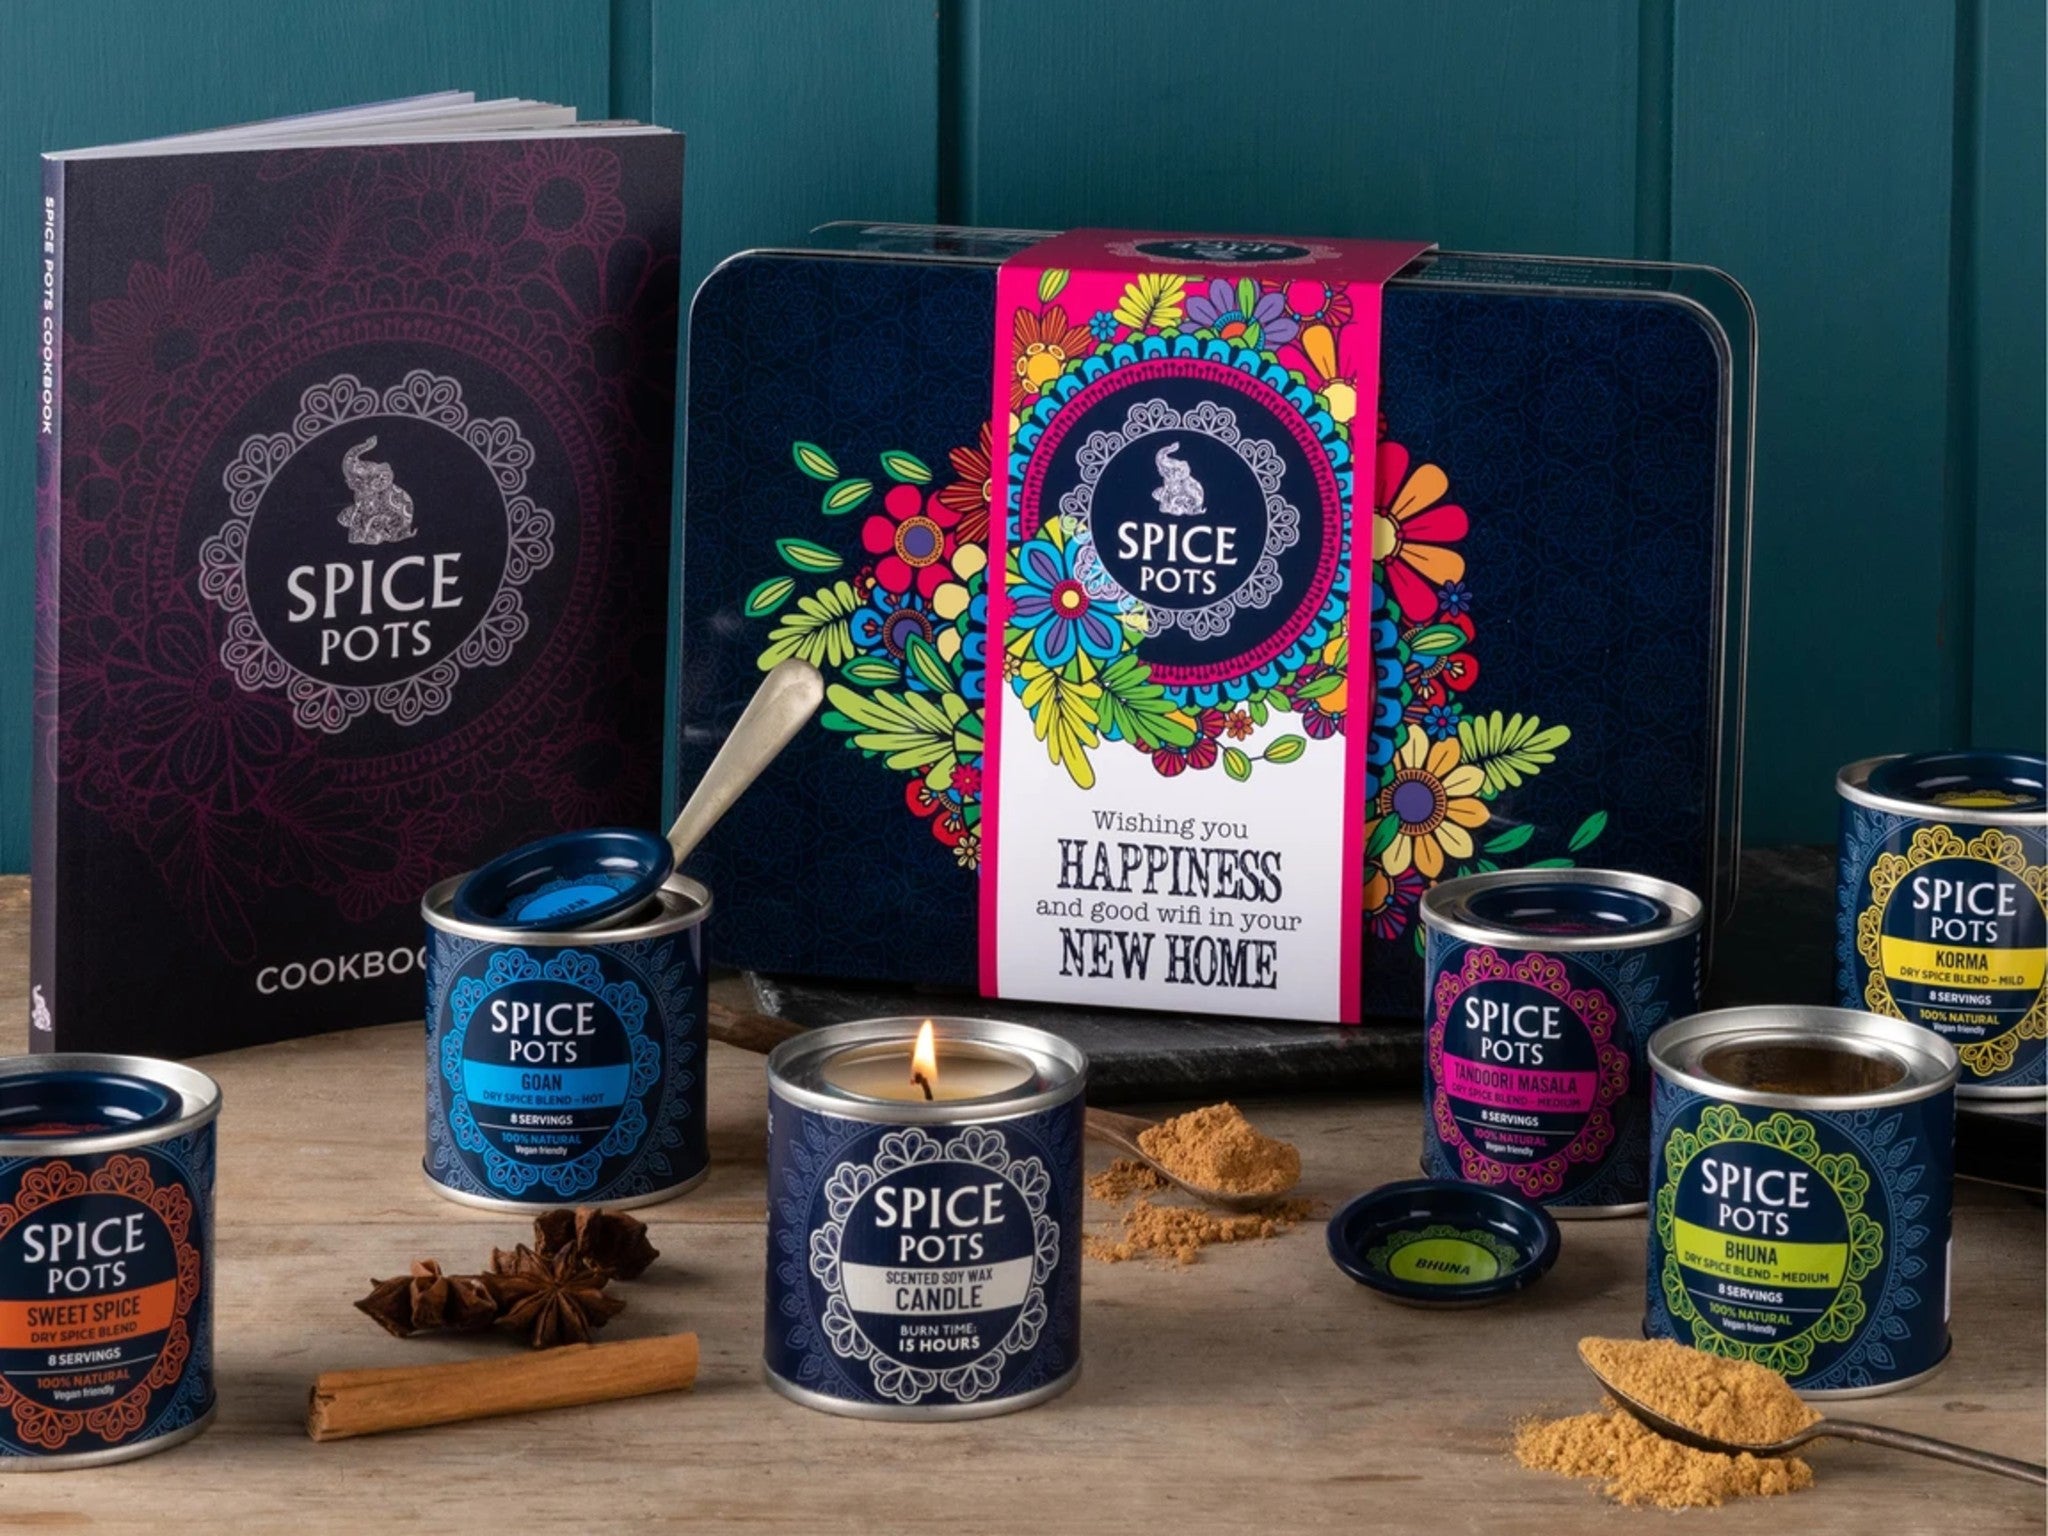 Spice Pots new home gift box  indybest.jpeg